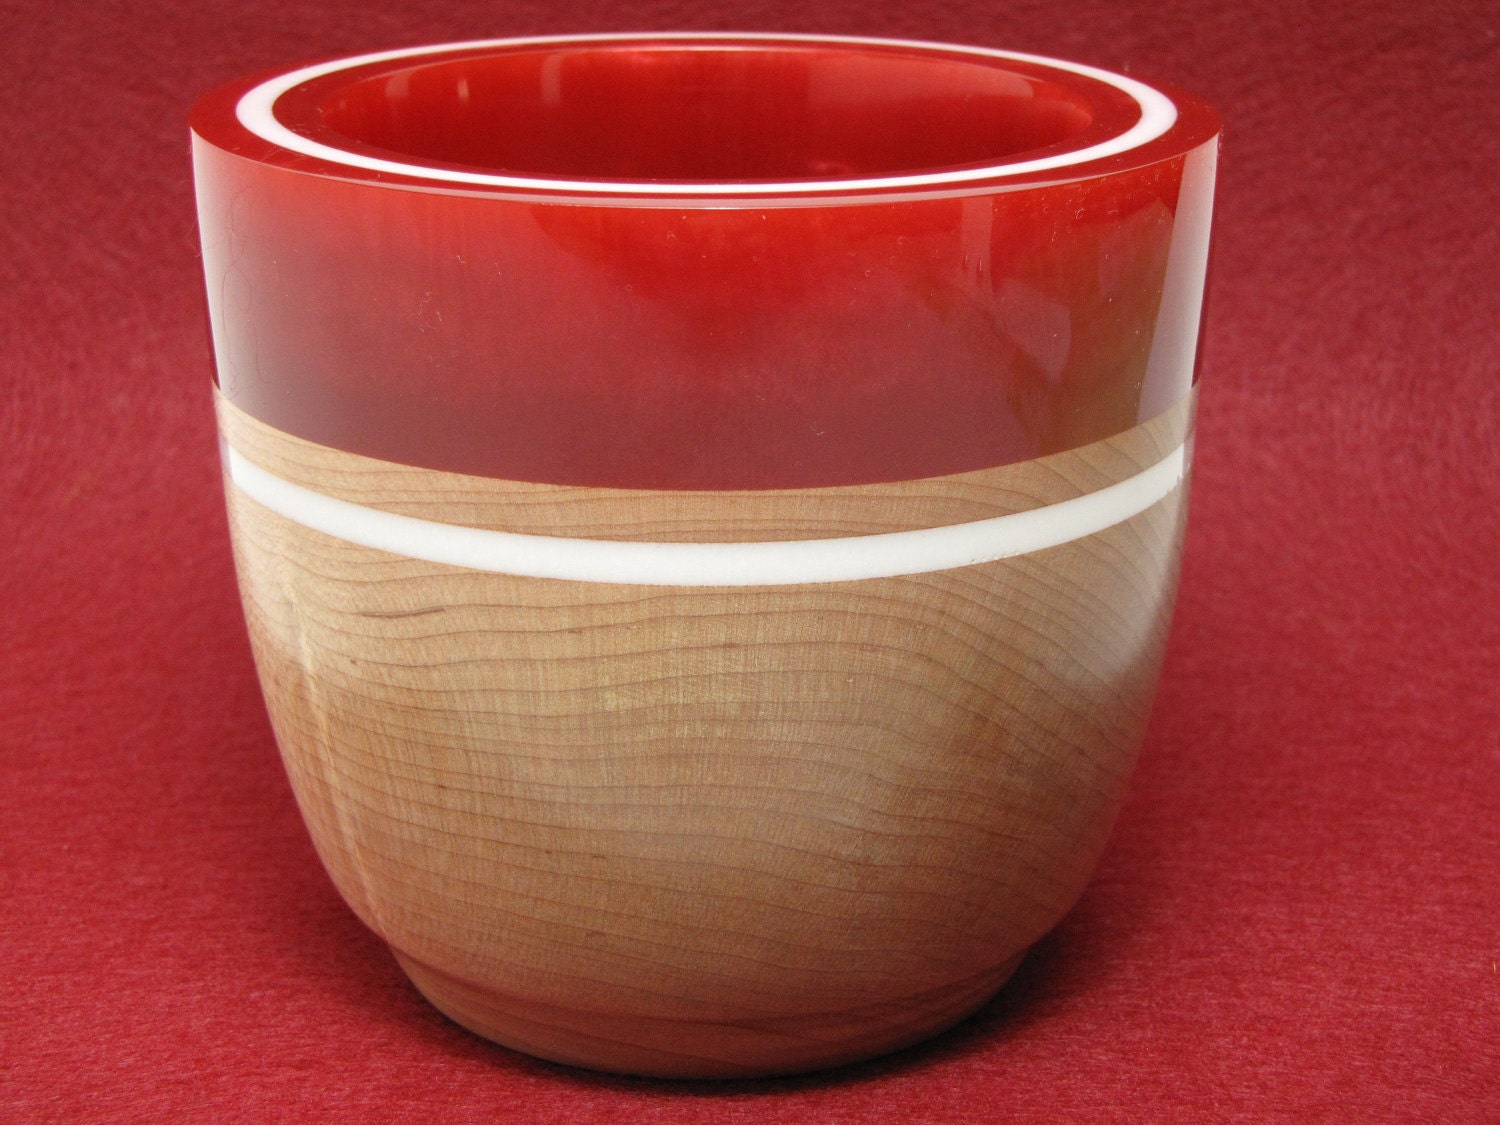 Hard Maple Bowl with a Red Pearl Resin Rim